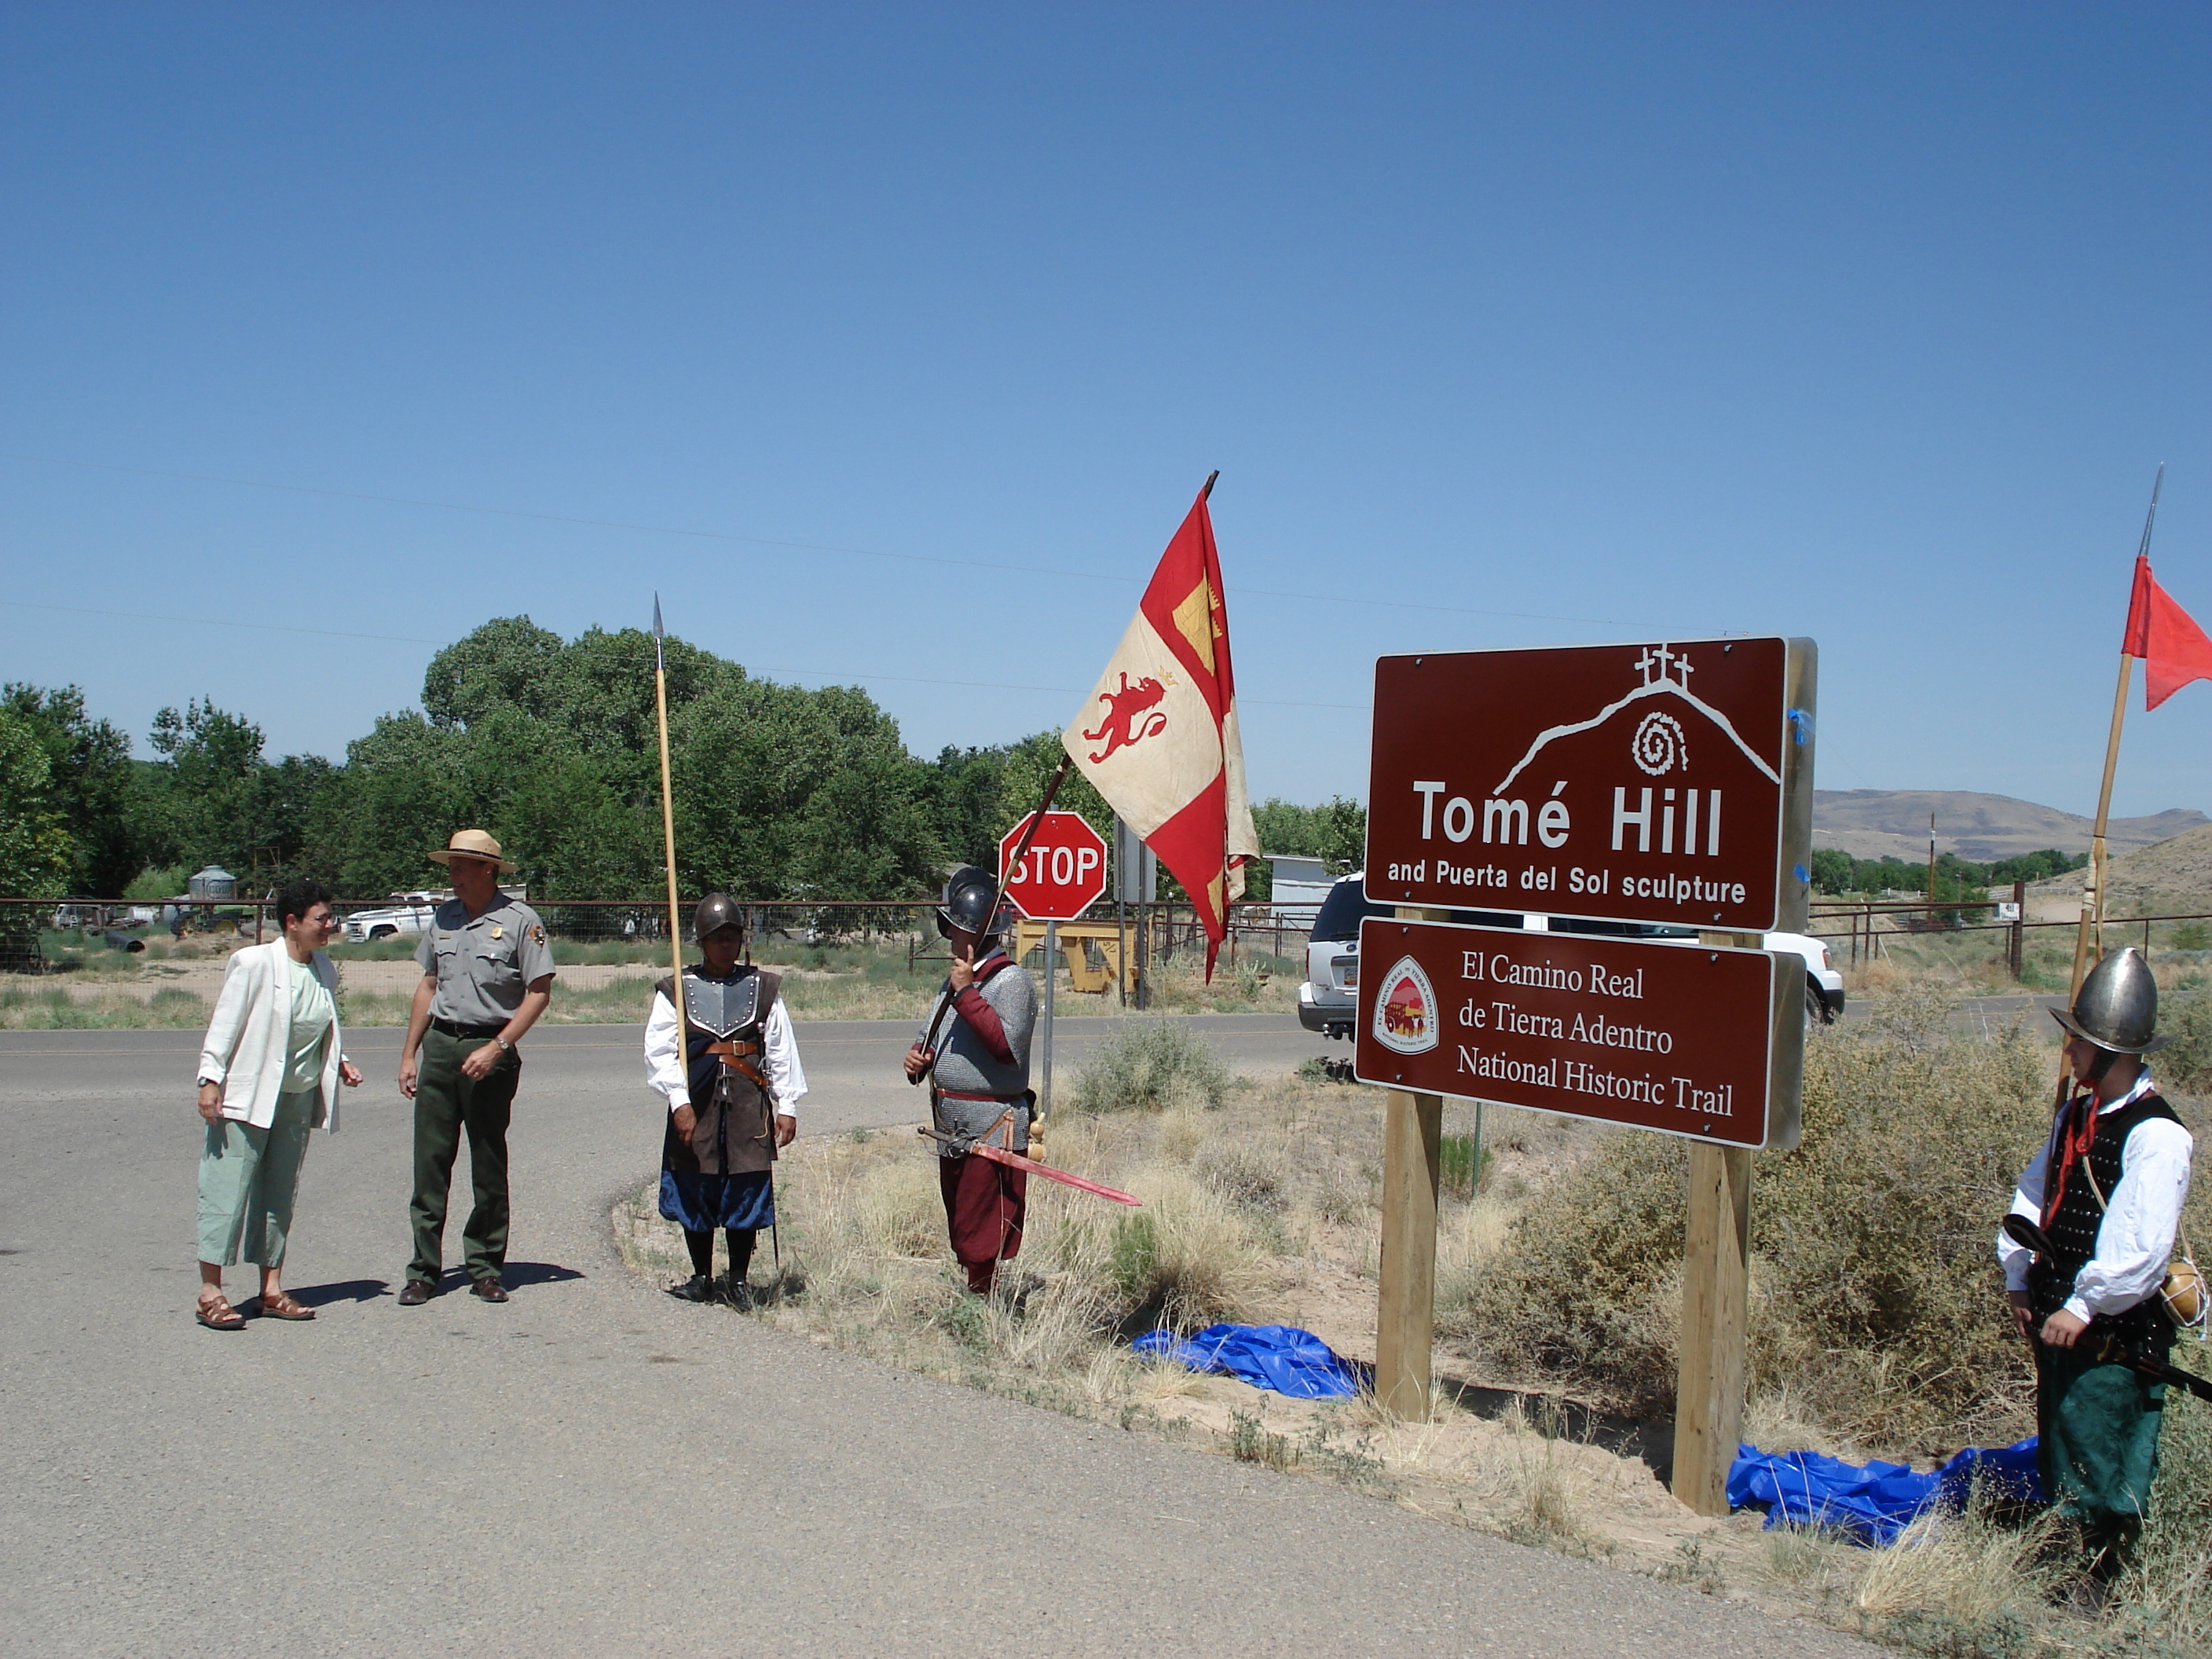 A group prepares for a historic reenactment at Tome Hill in Valencia County, NM